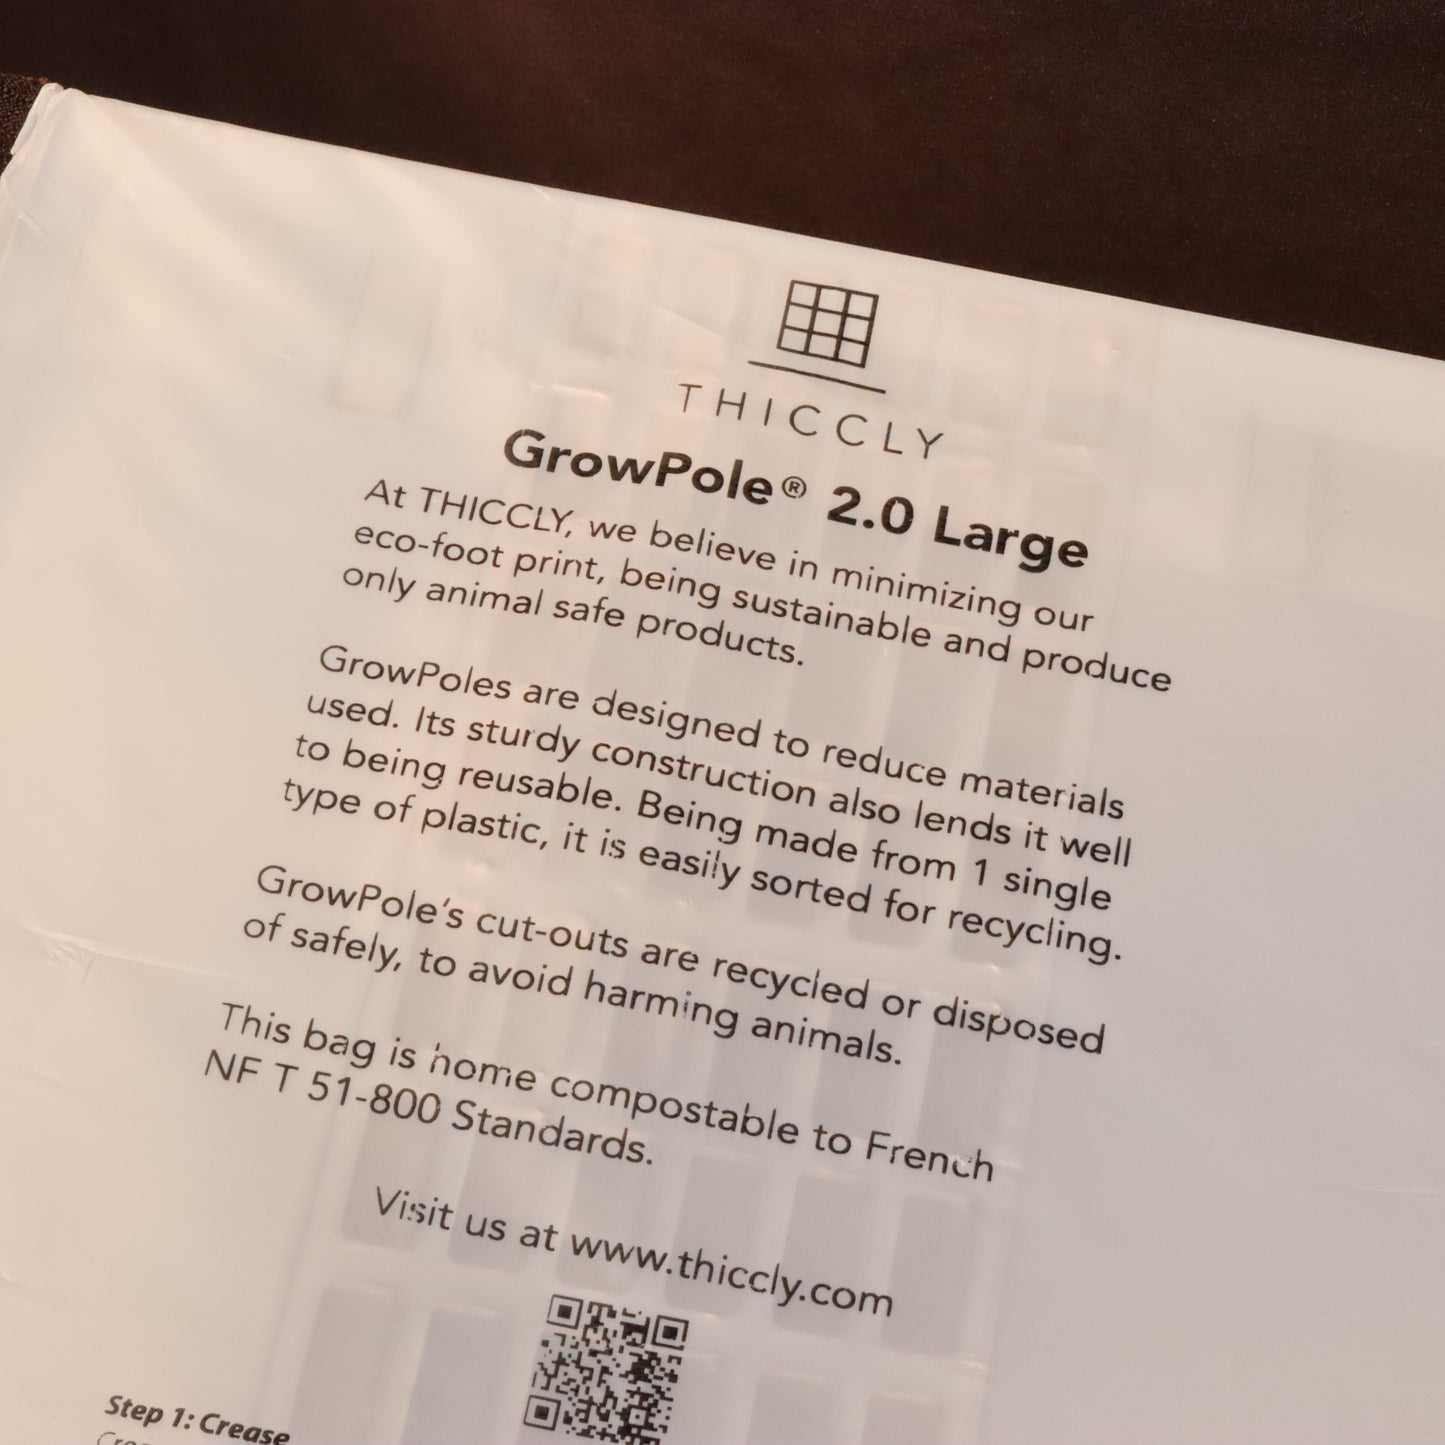 Thiccly GrowPole - 2.0 Pro Large - 5 Poles